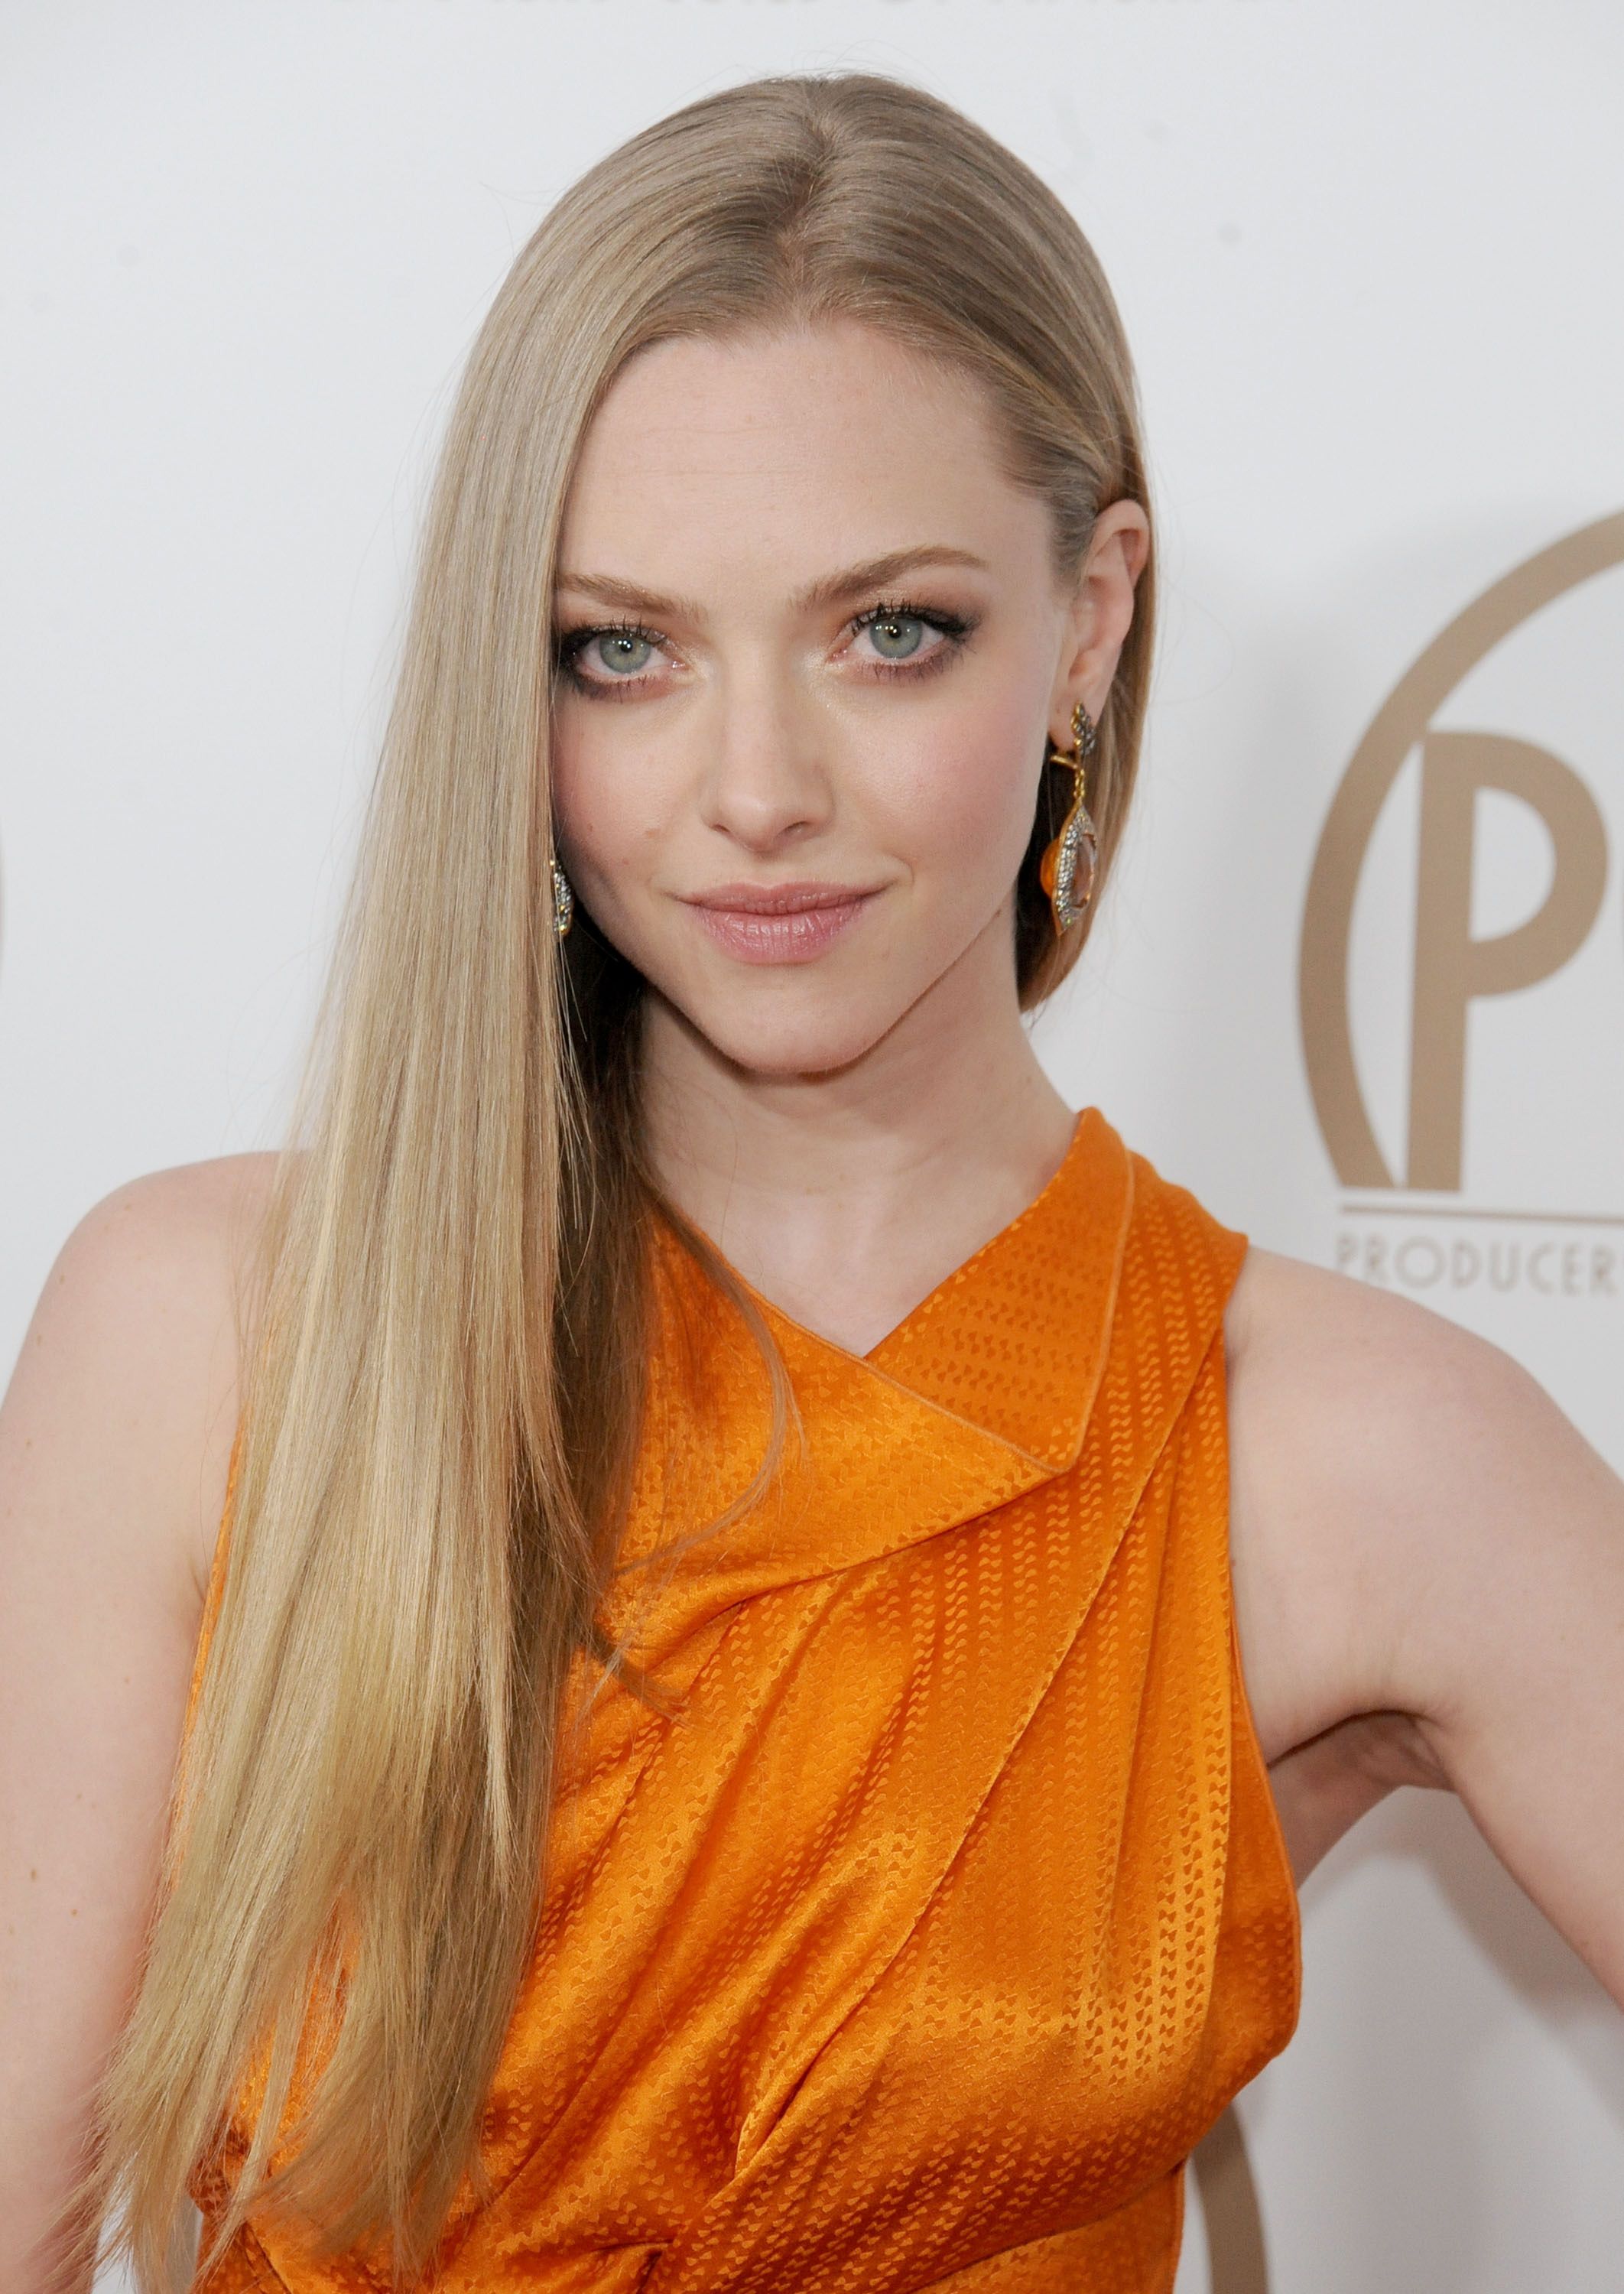 Pictures Of Amanda Seyfried